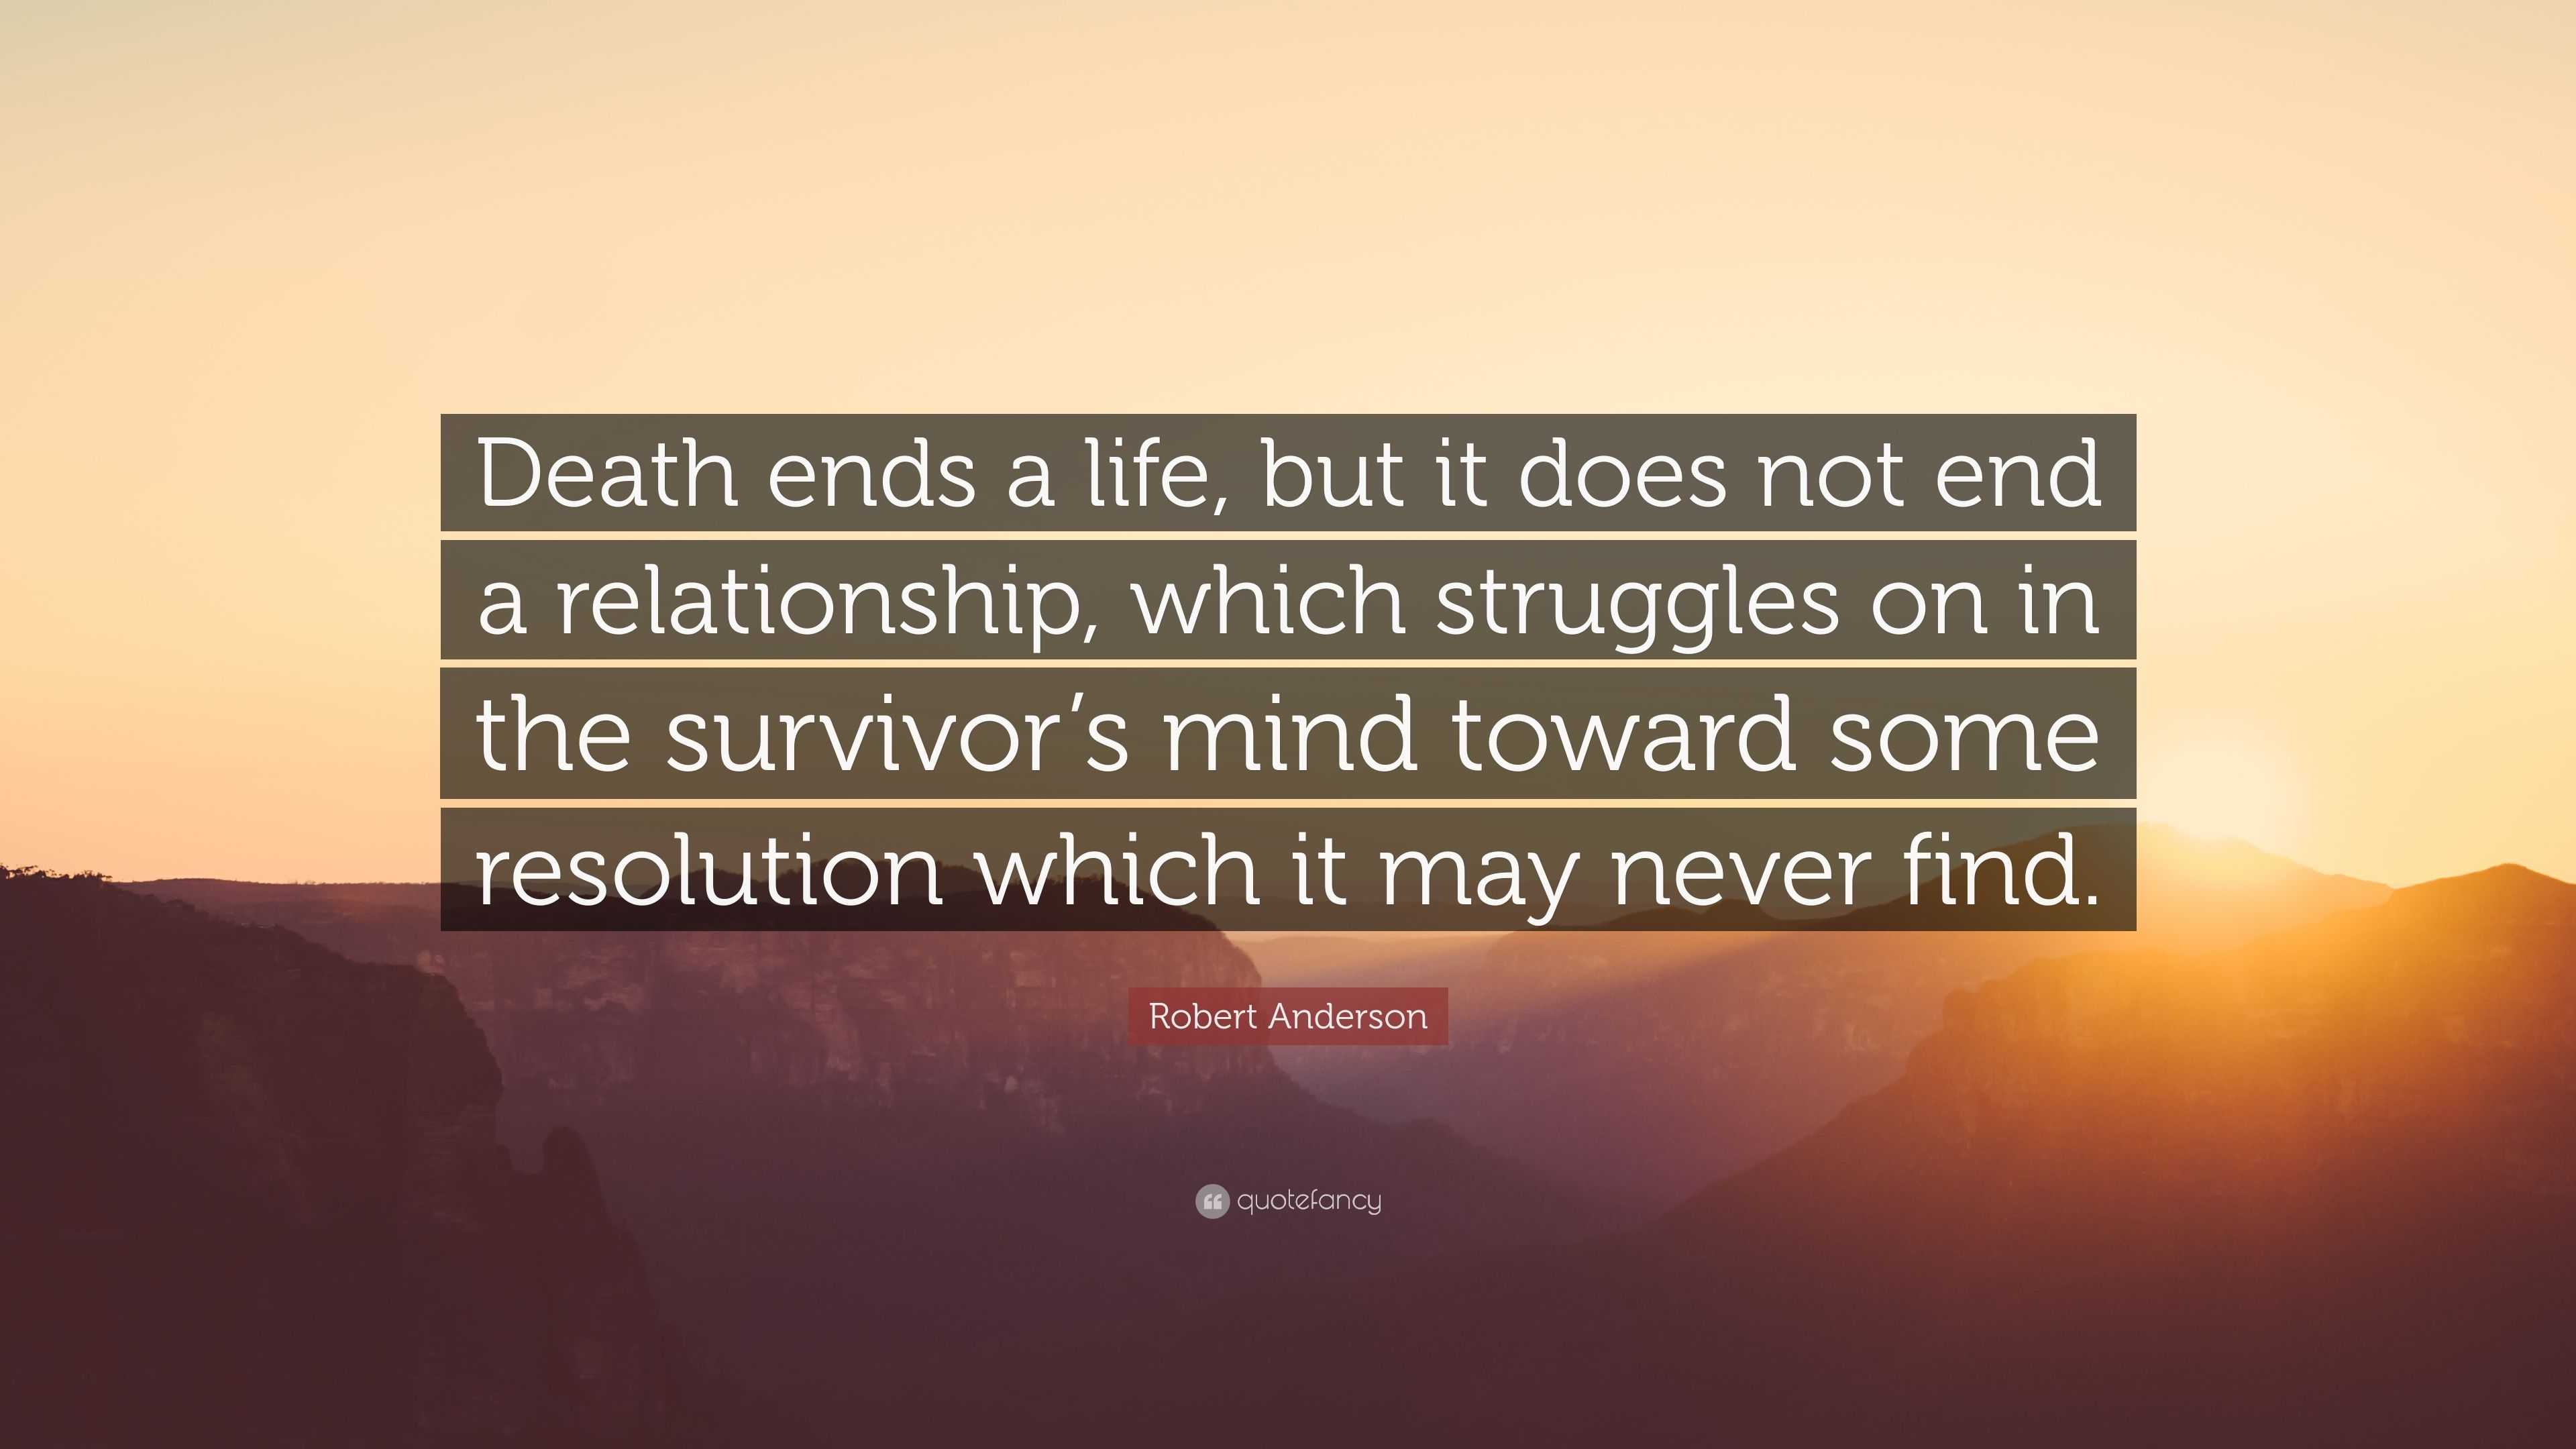 Robert Anderson Quote: “Death ends a life, but it does not end a ...